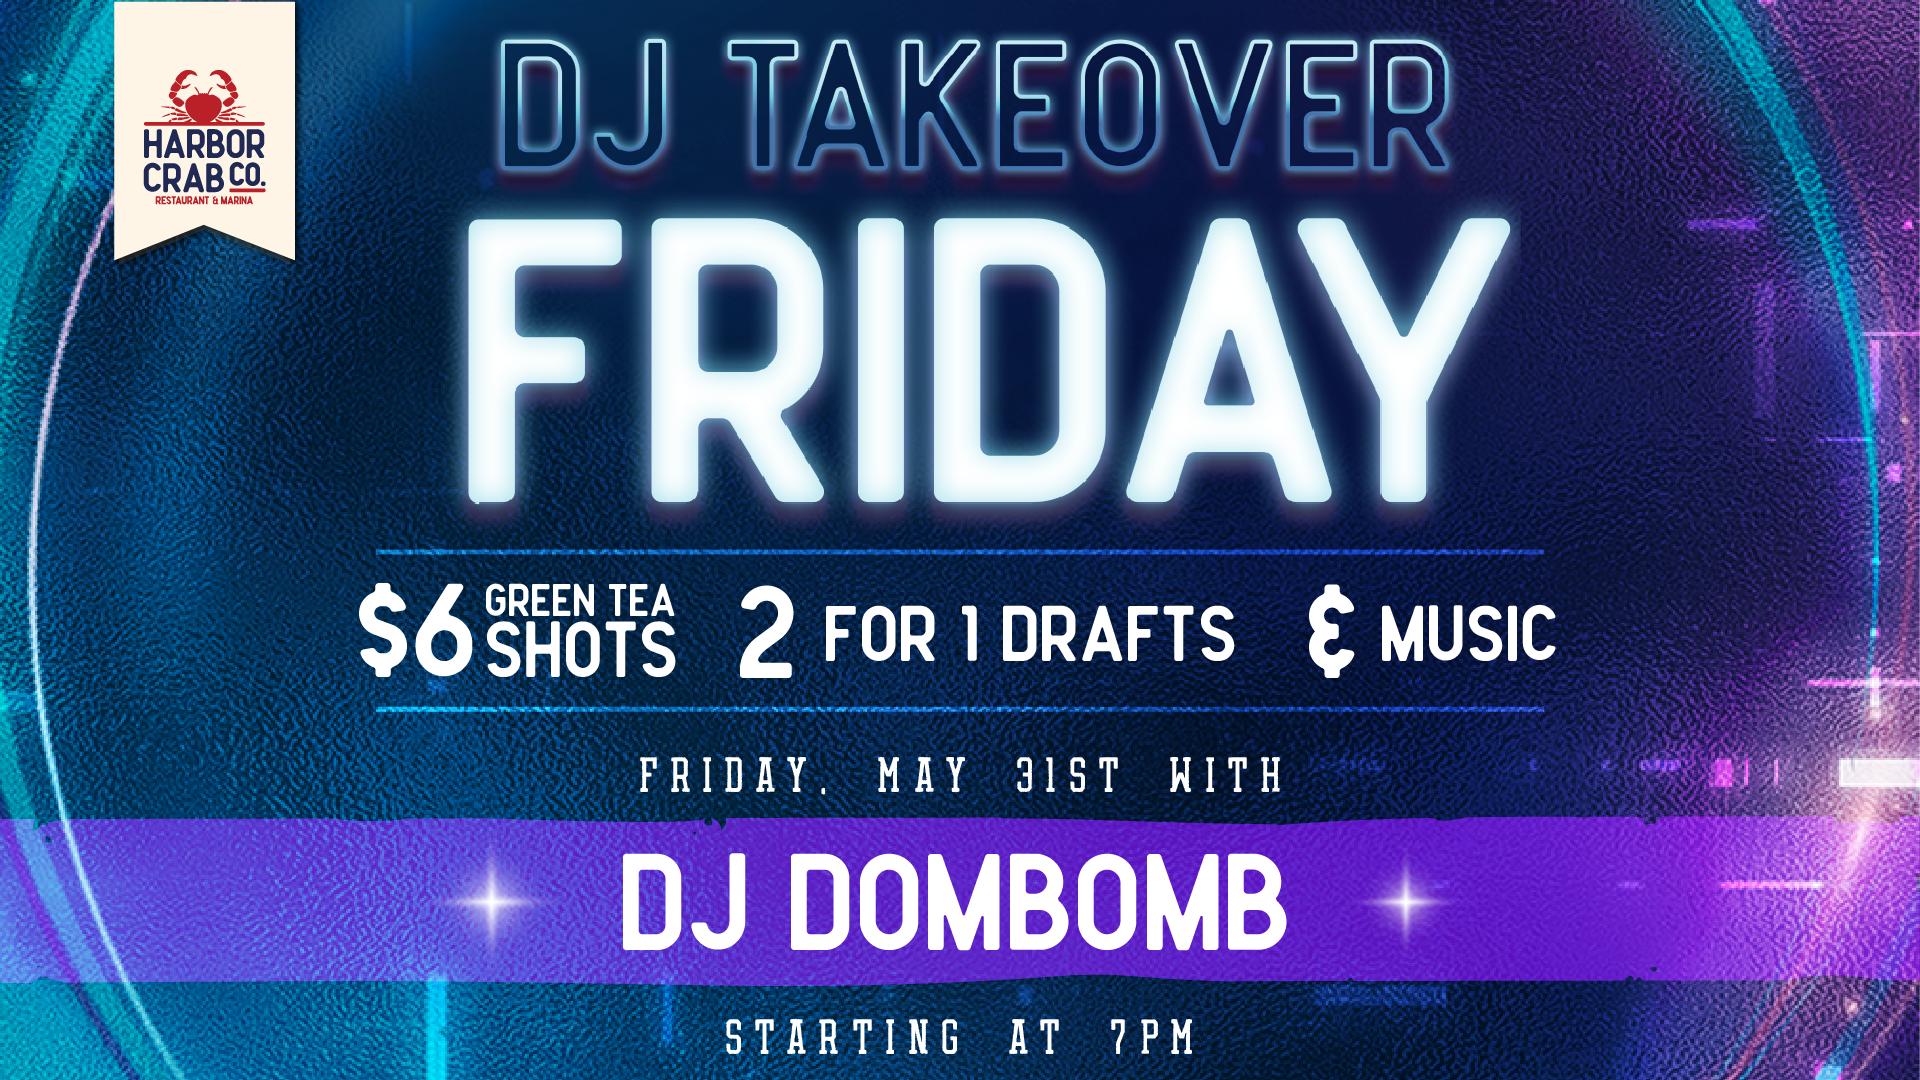 DJ Takeover with DJ DOMBOMB at Harbor Crab on May 31st, starting at 7 pm. Enjoy music, drinks, and a lively atmosphere.